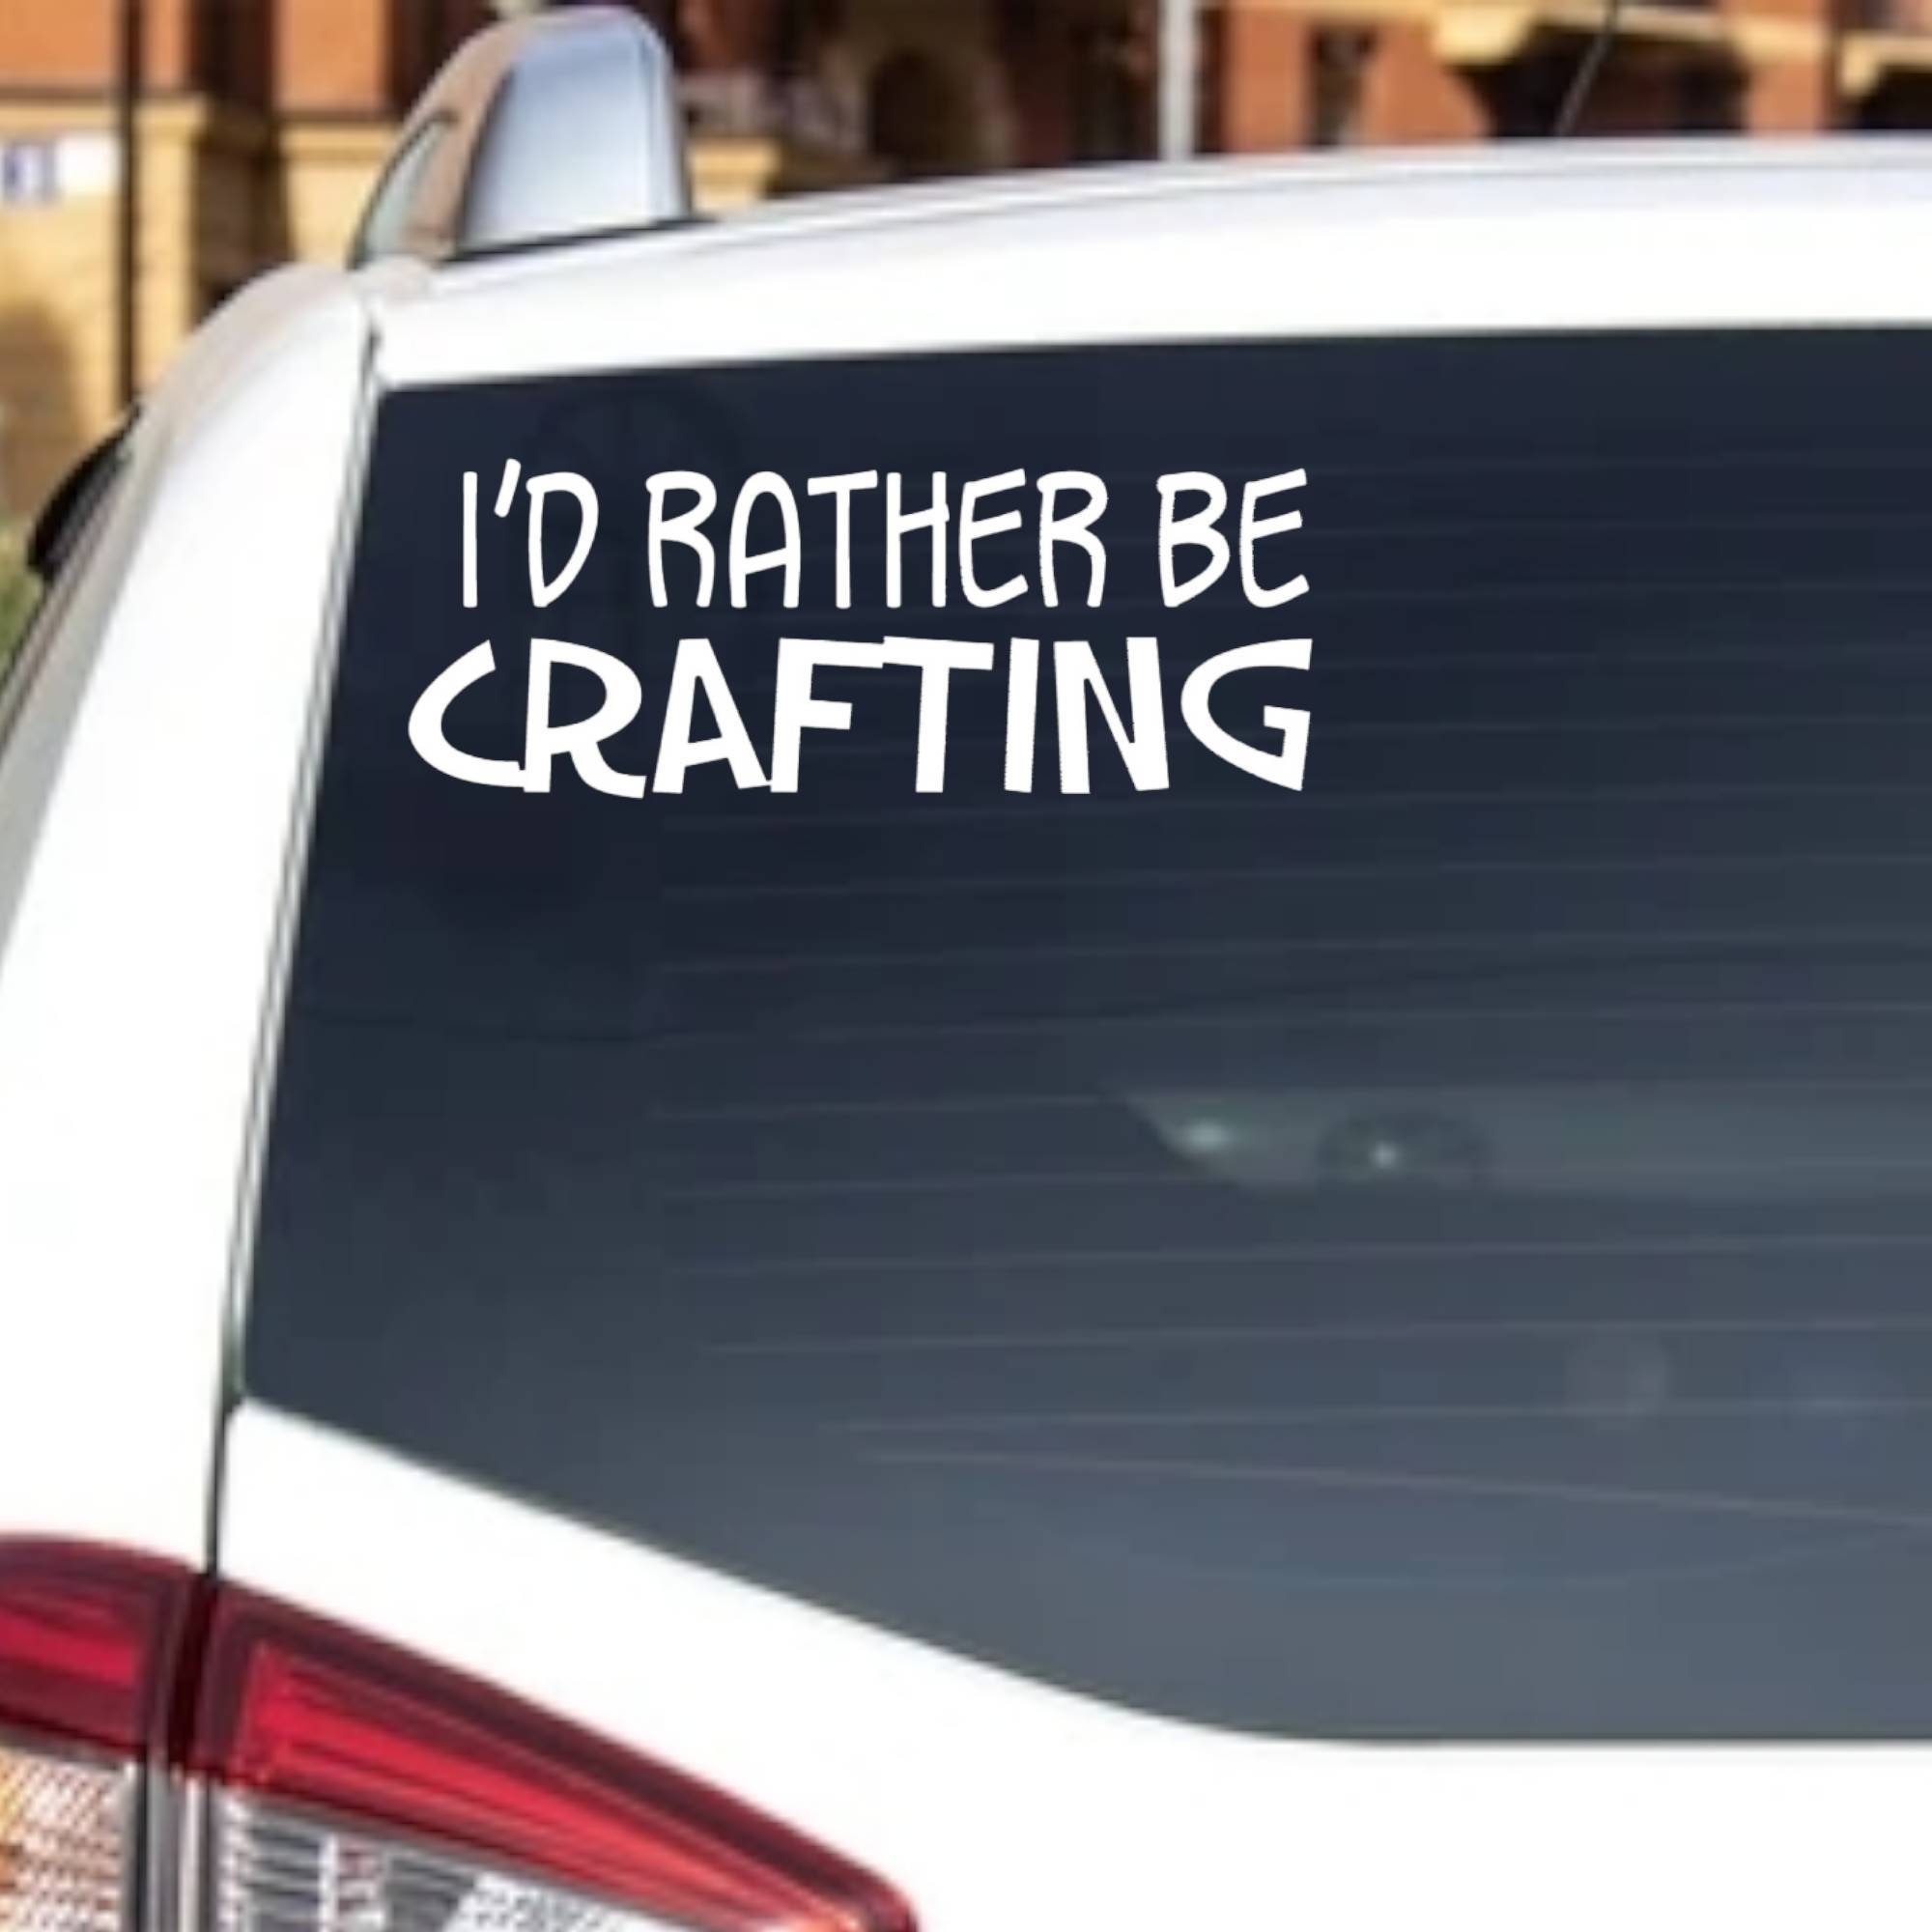 I'D RATHER BE SCRAPPING METAL Removable Permanent Vinyl Car Decal Sticker